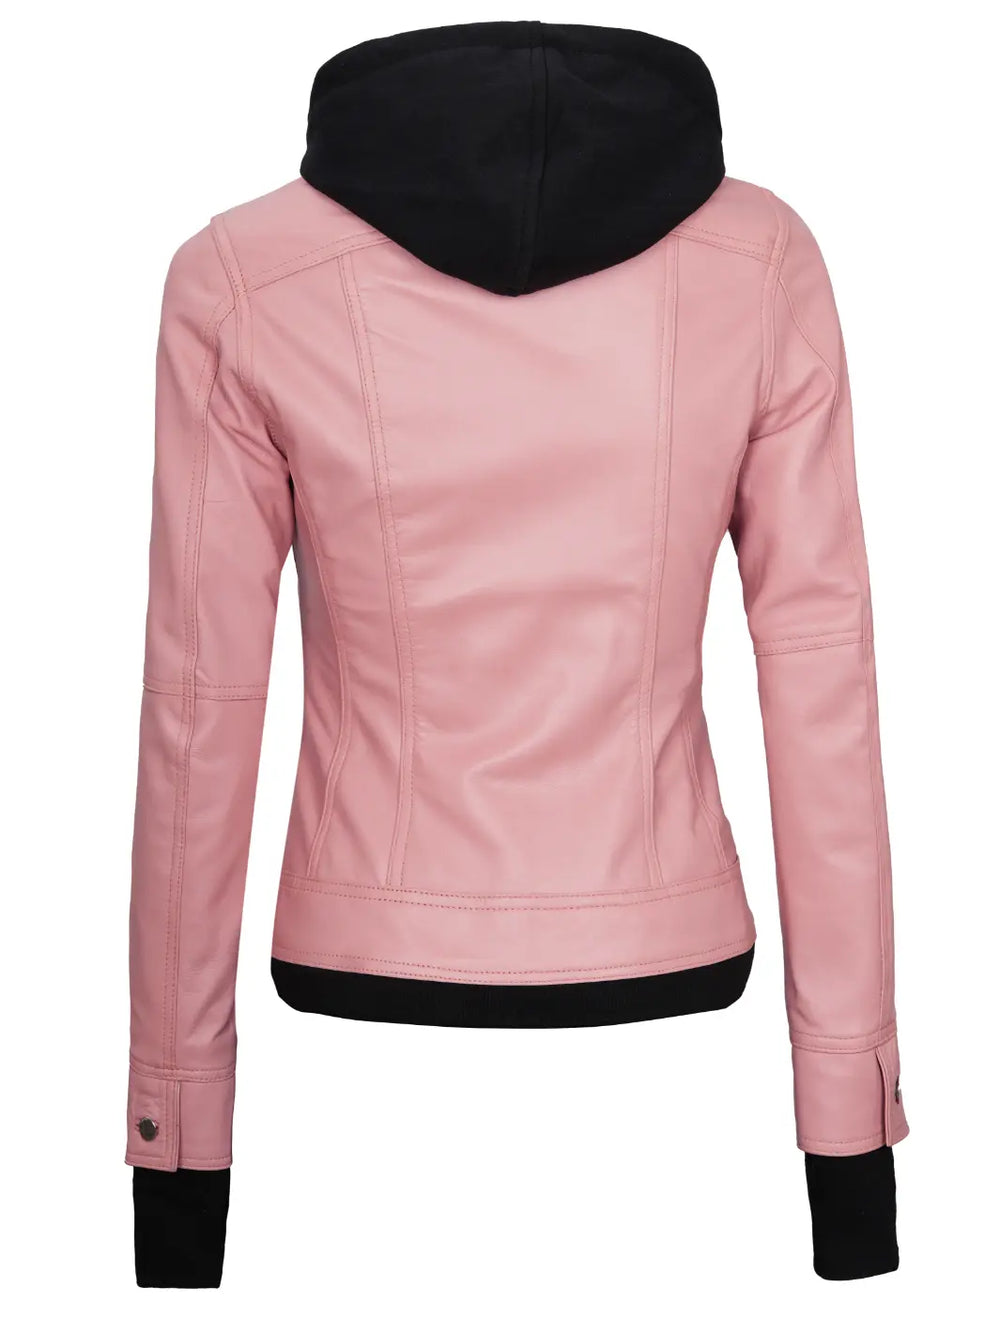 Pink hooded leather jacket womens